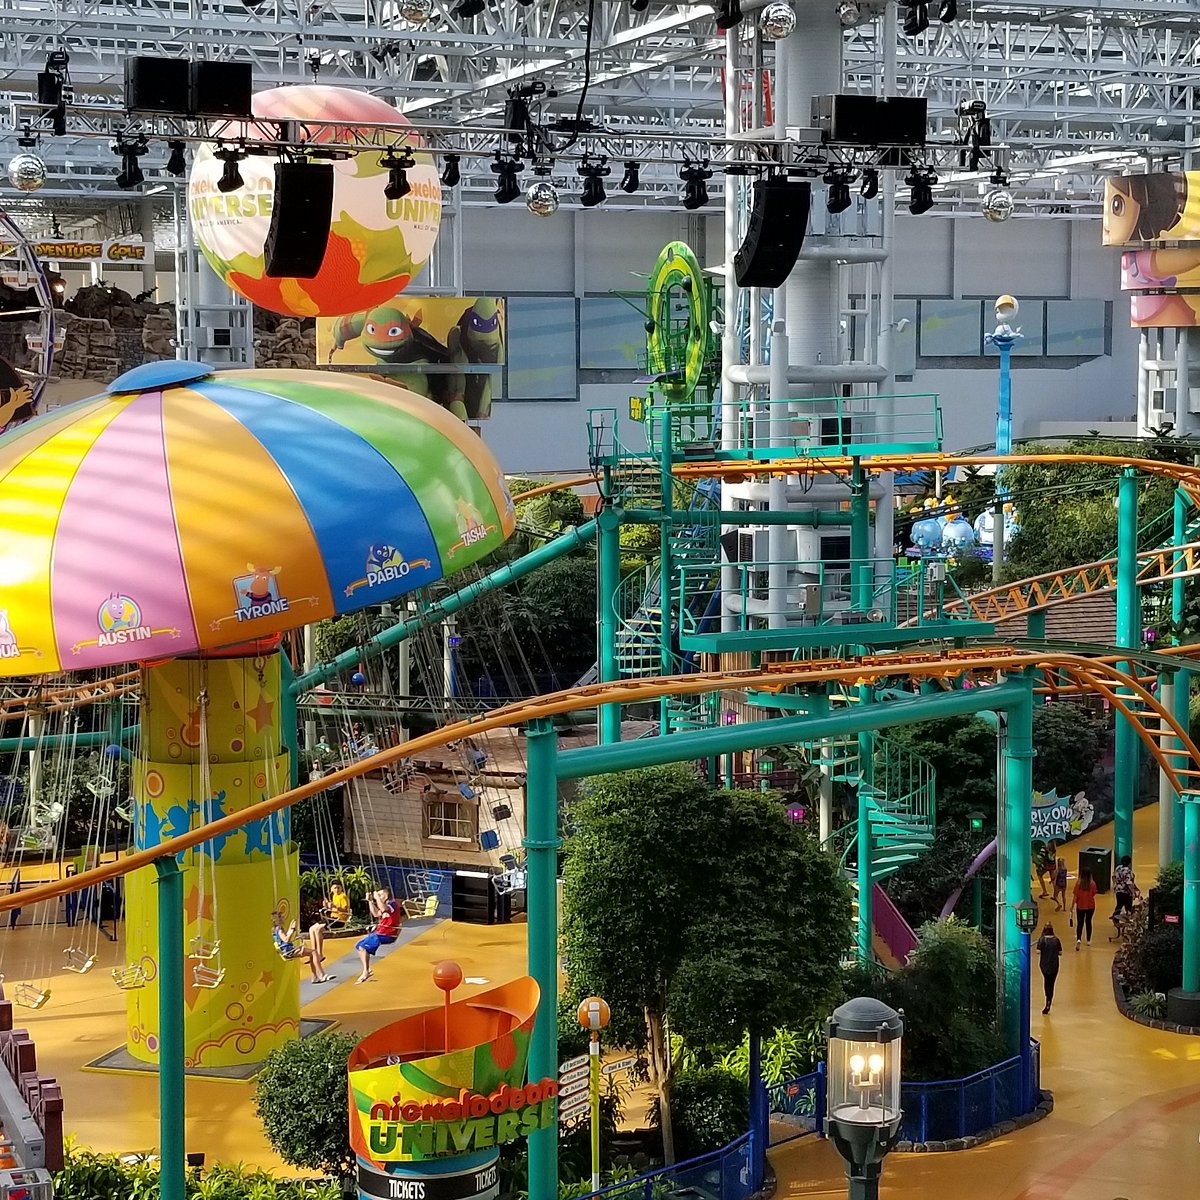 Mall of America - Discover products you'll love at